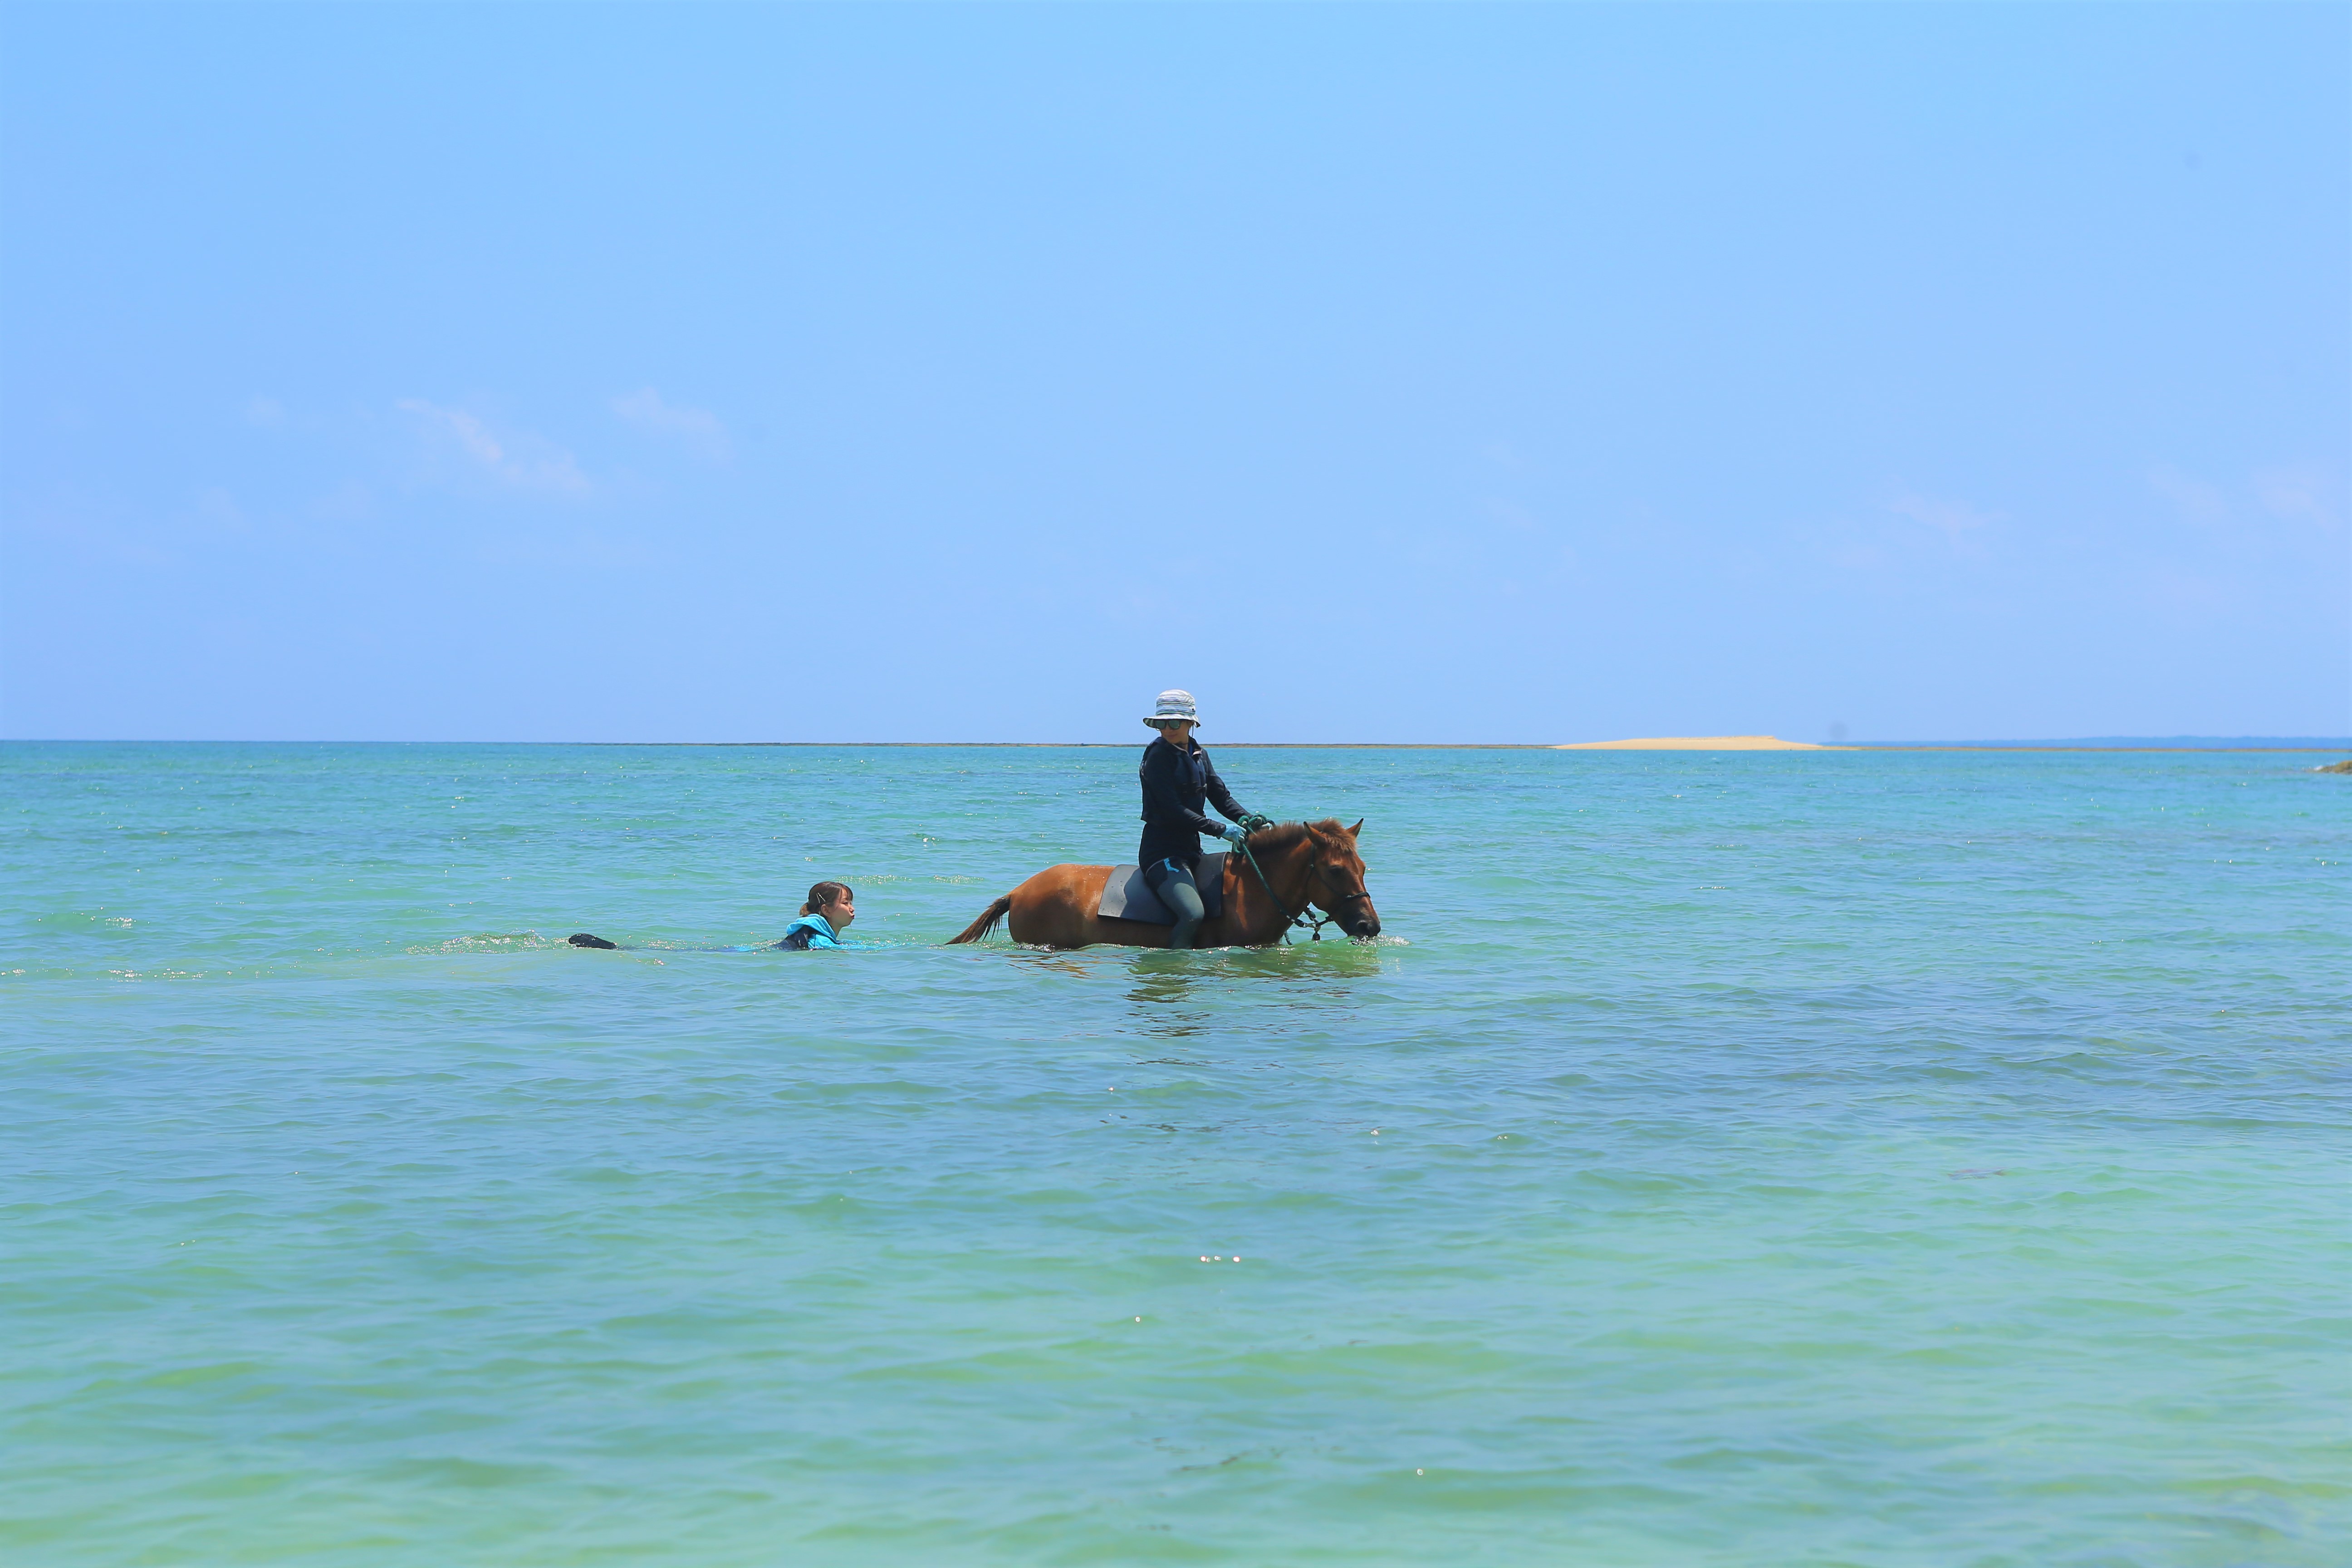 Ride and Swim in the Okinawan Sea (for a person)